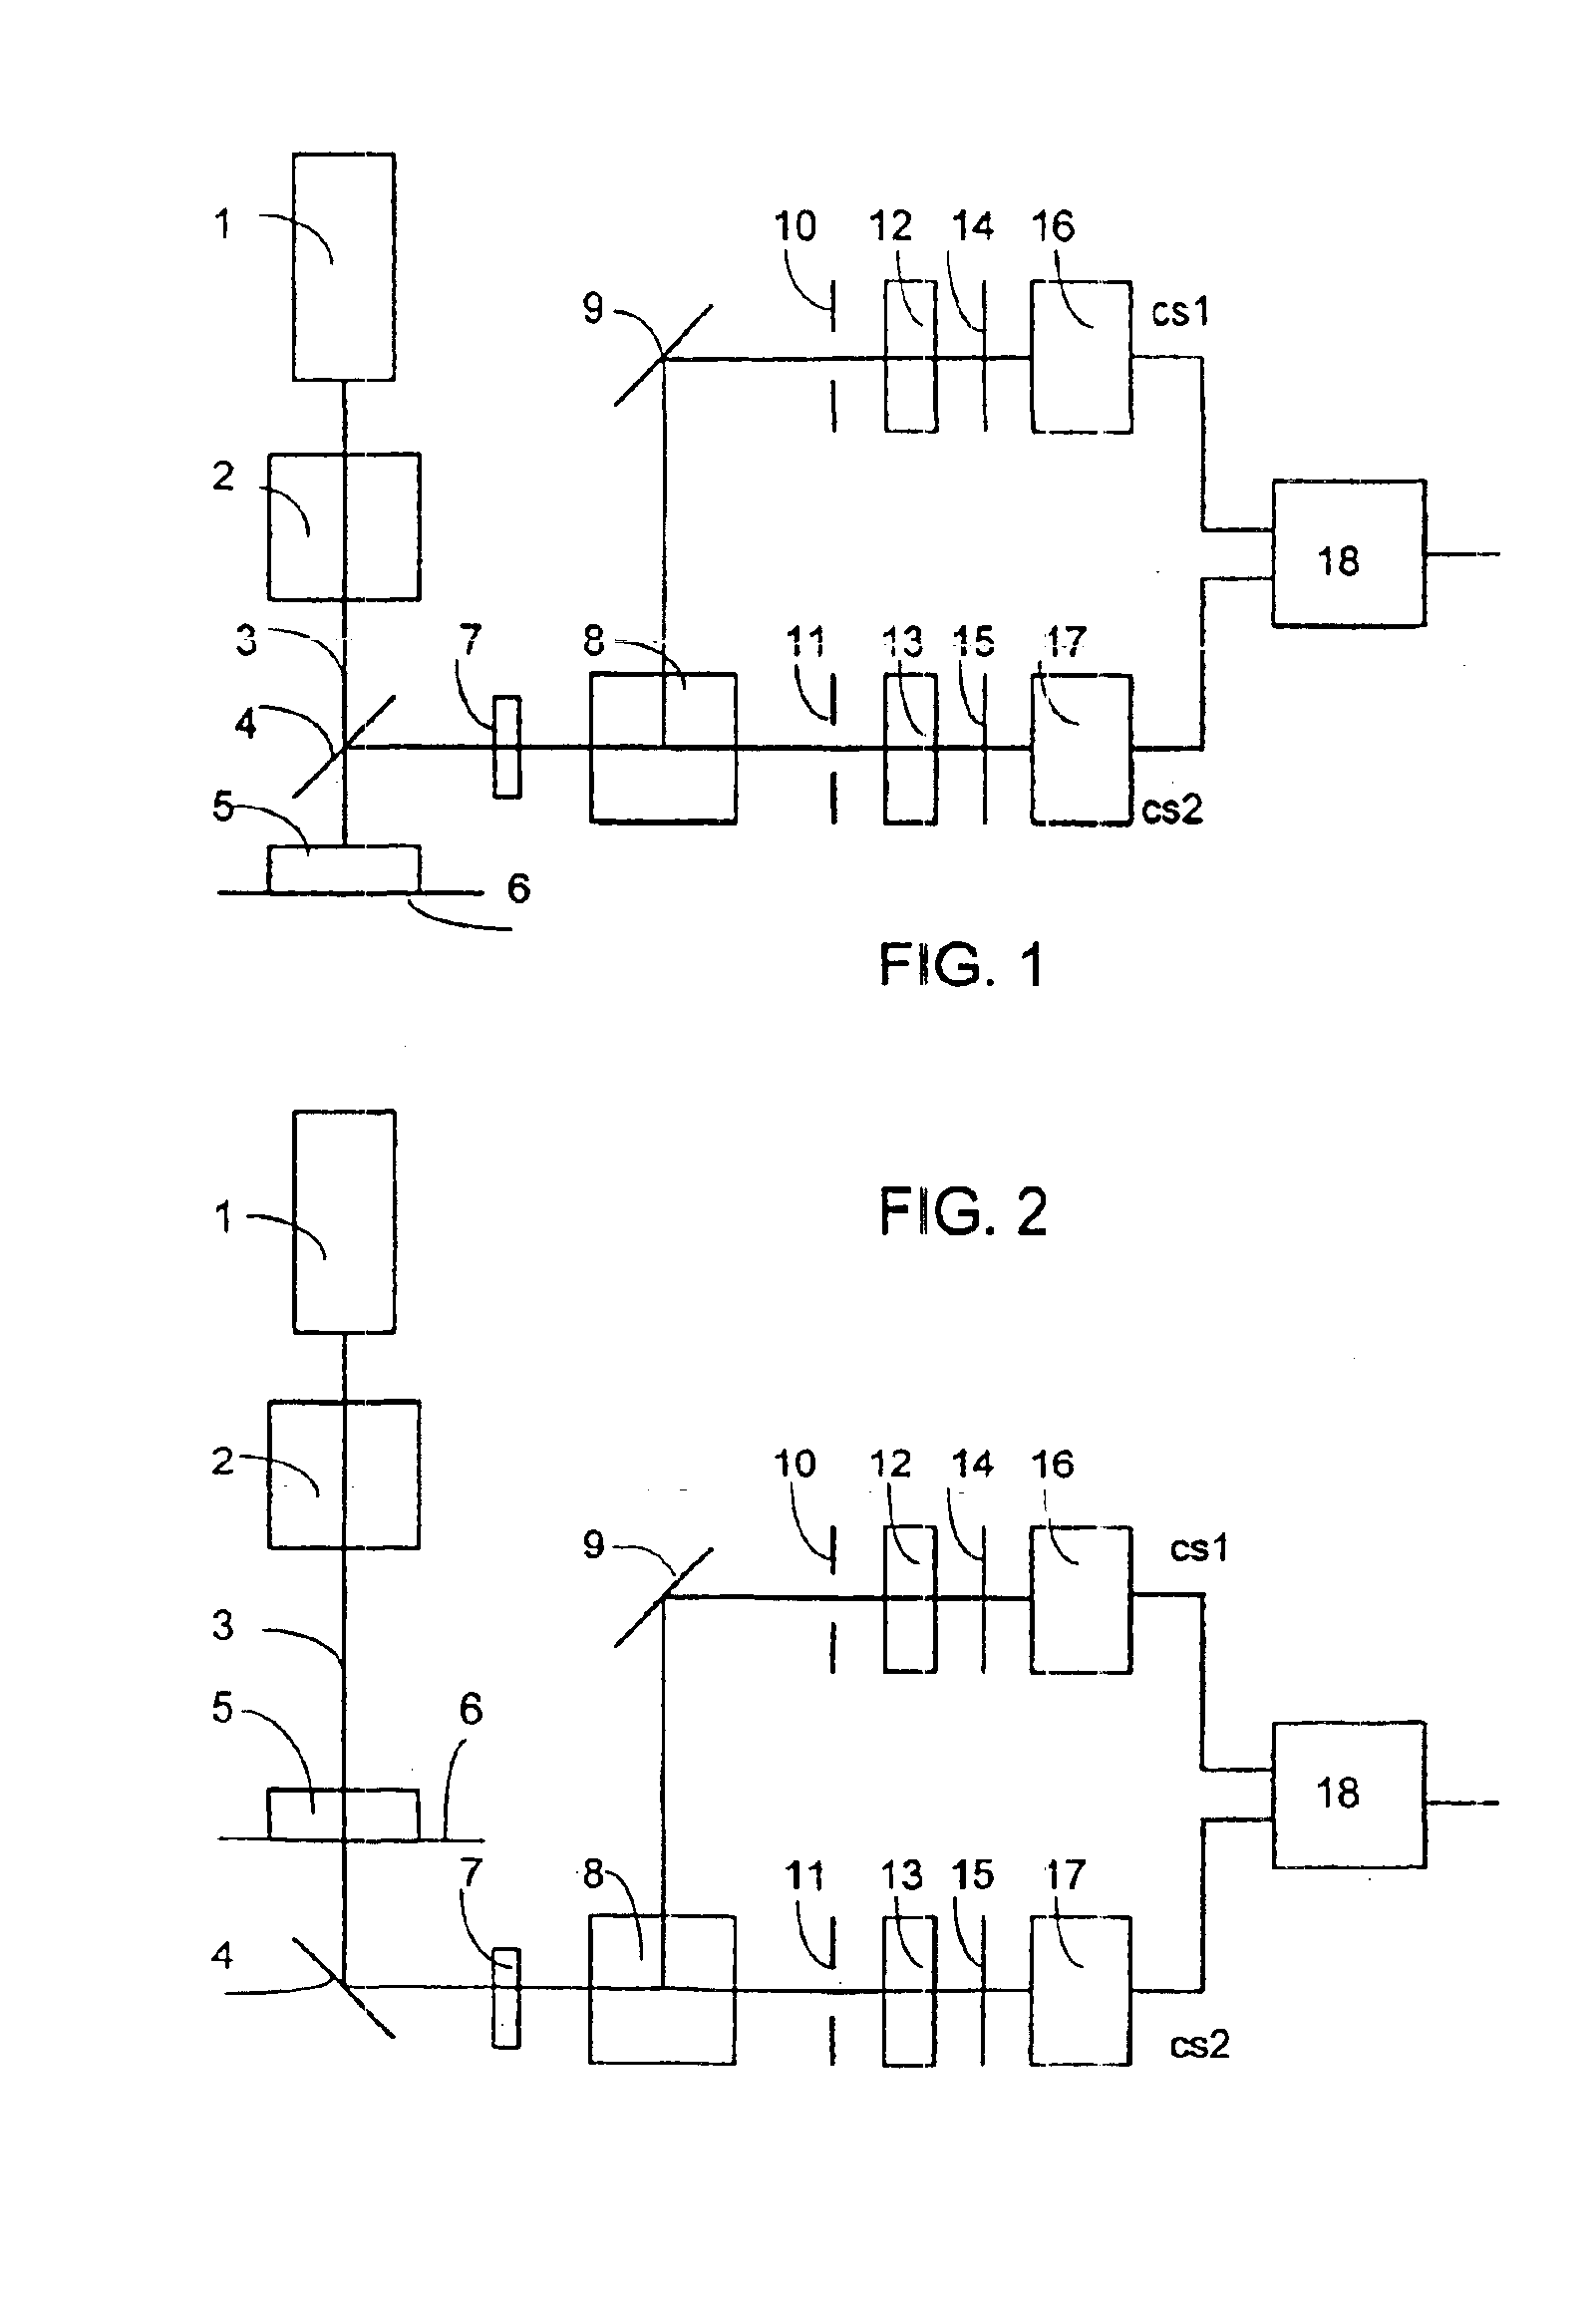 Method and apparatus for determining the polarization properties of light emitted, reflected or transmitted by a material using a laser scanning microscope